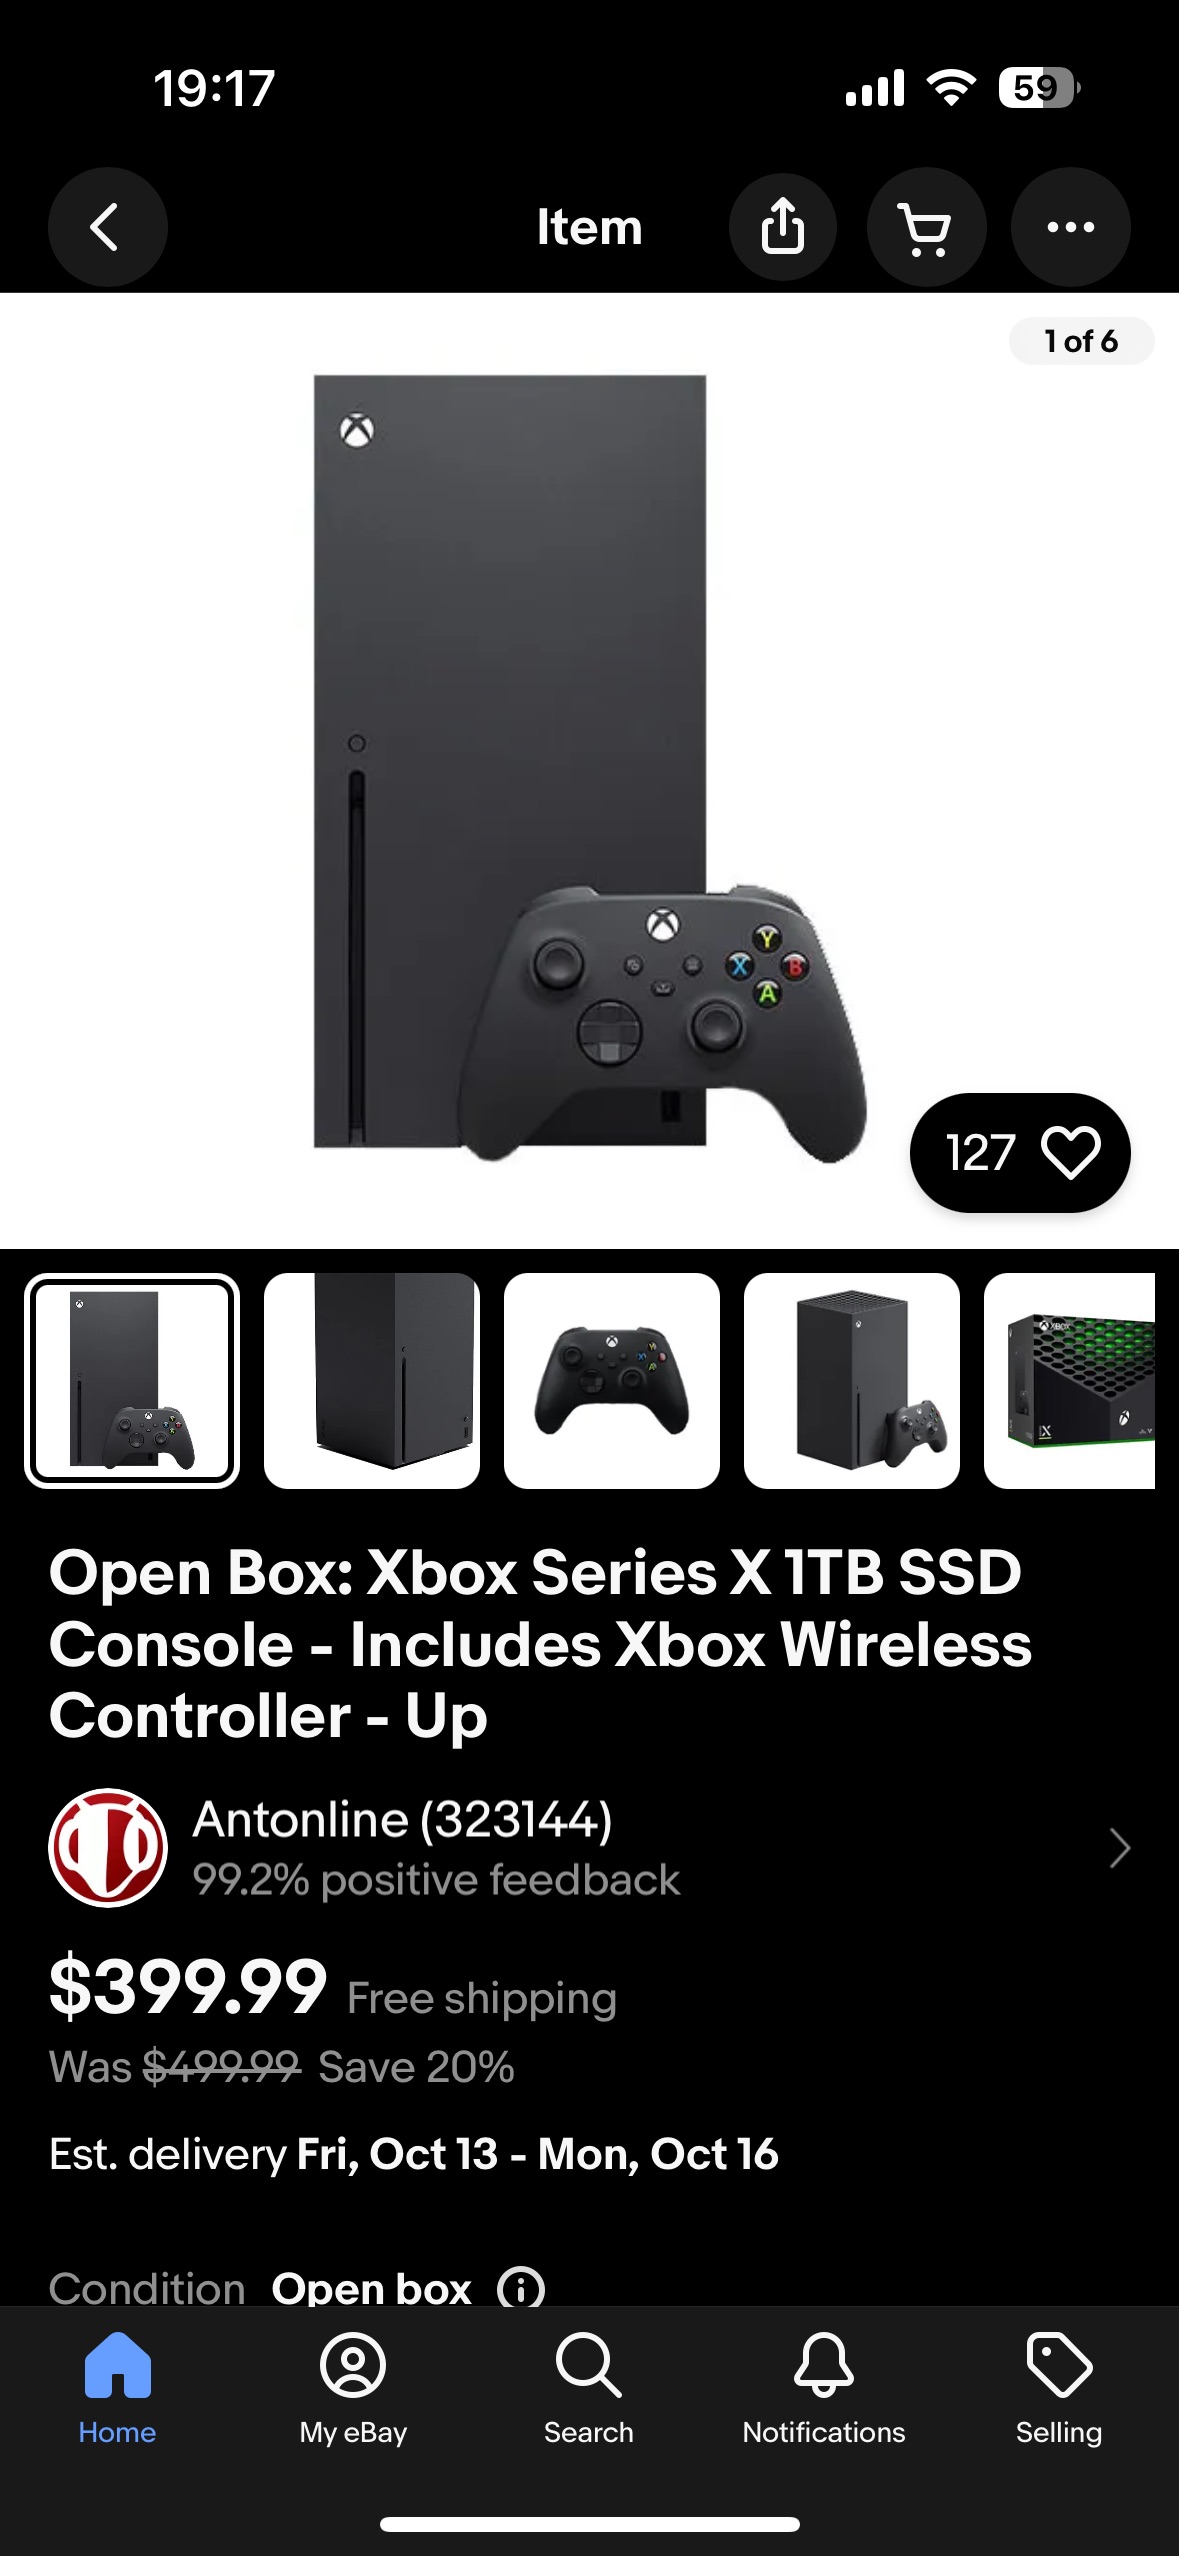 Open Box: Xbox Series X 1TB SSD Console - Includes Xbox Wireless Controller 开箱版